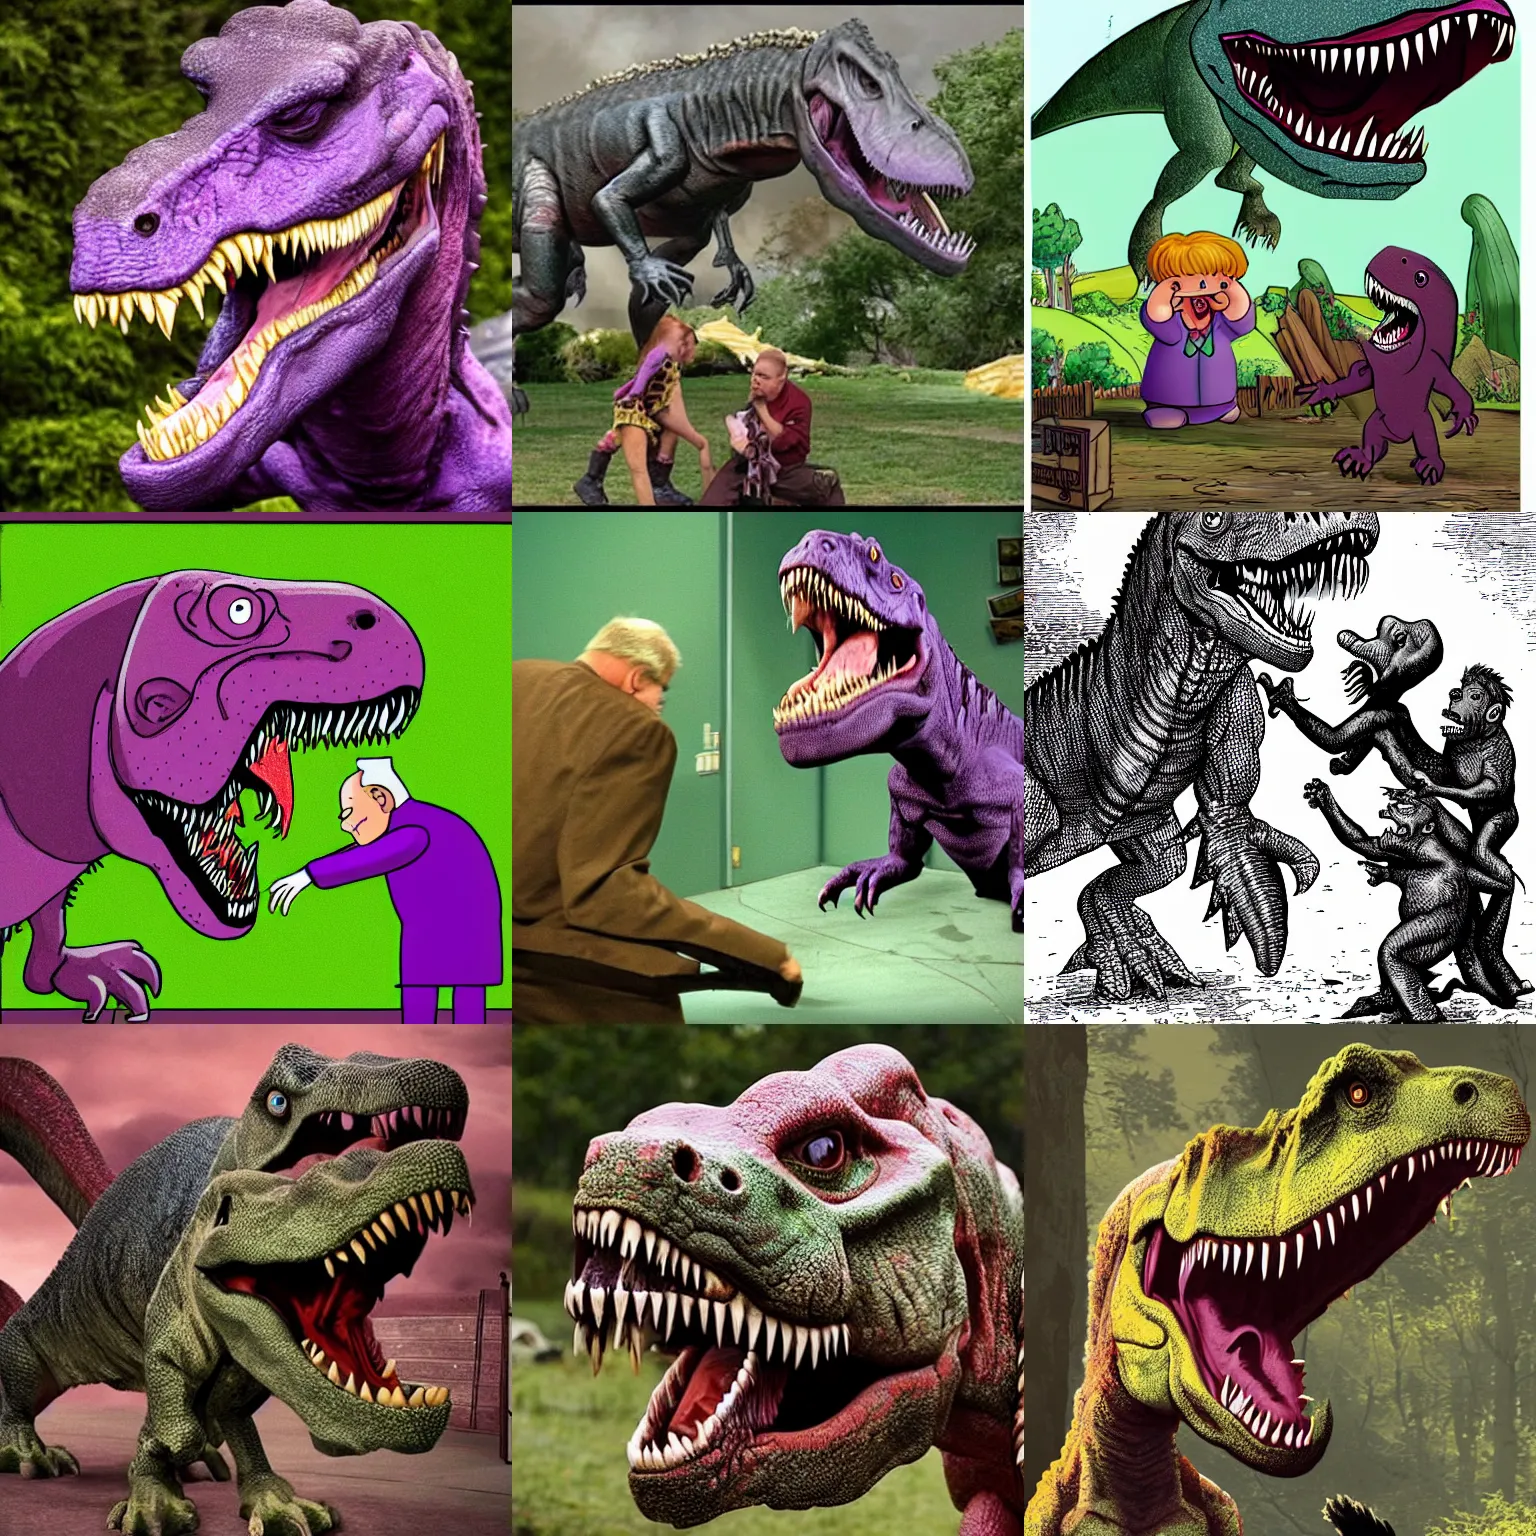 Prompt: barney is being eaten by a tyrannosaurus rex